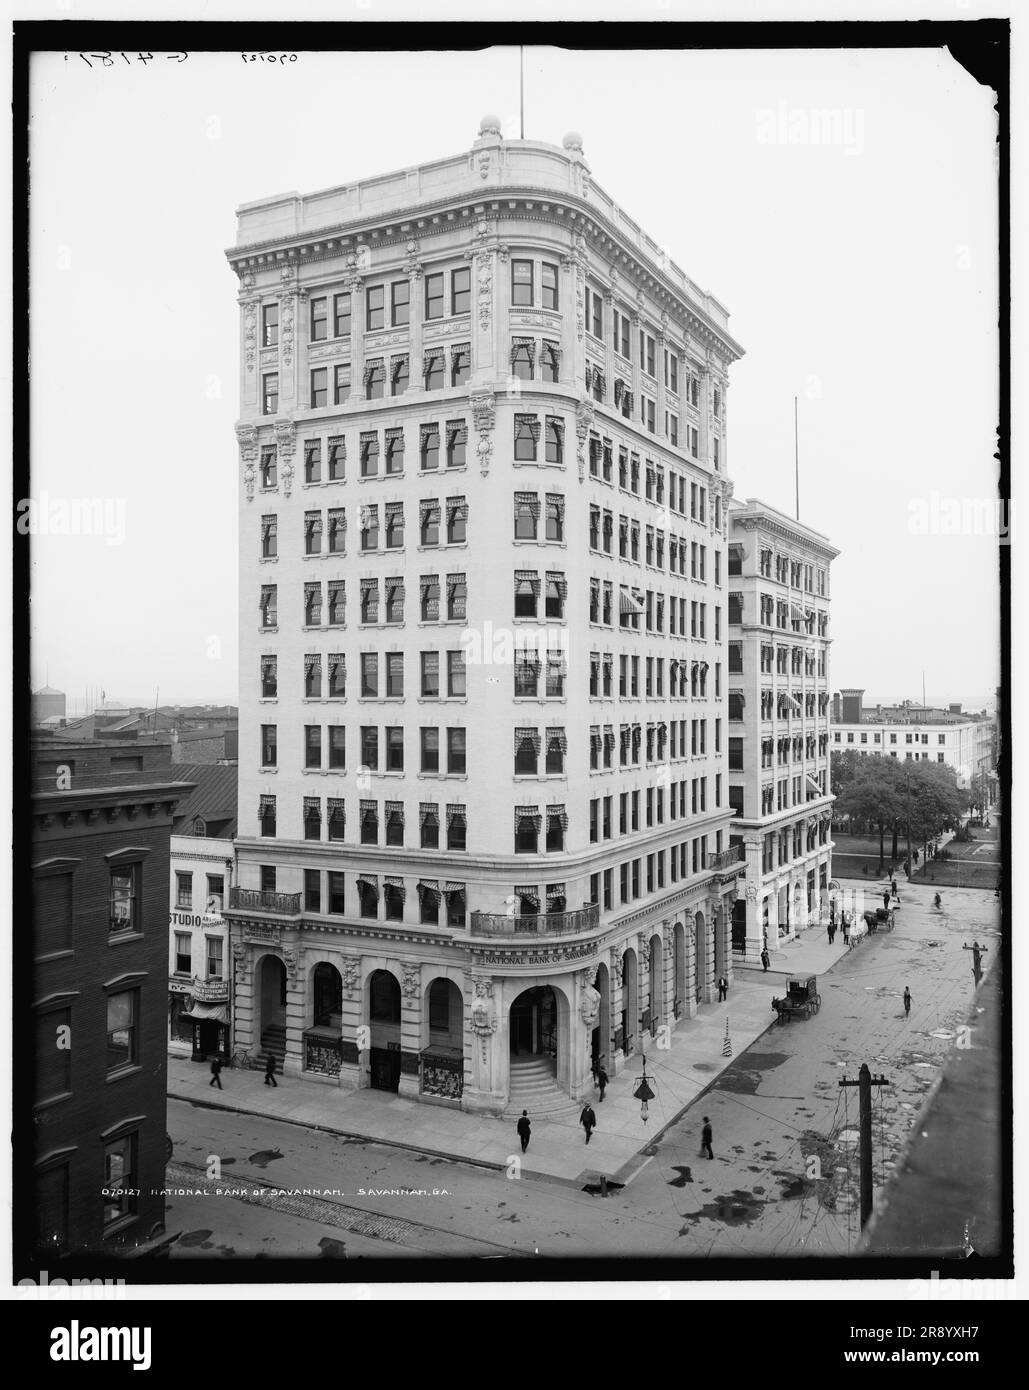 National Bank of Savannah, Savannah, Ga., c1907. Building designed by Hyman Wallace Witcover. Note shoe shop at street level: 'Beacon $3.00 Shoe - Maker to Wearer Direct - One Price...116 Styles'. Stock Photo